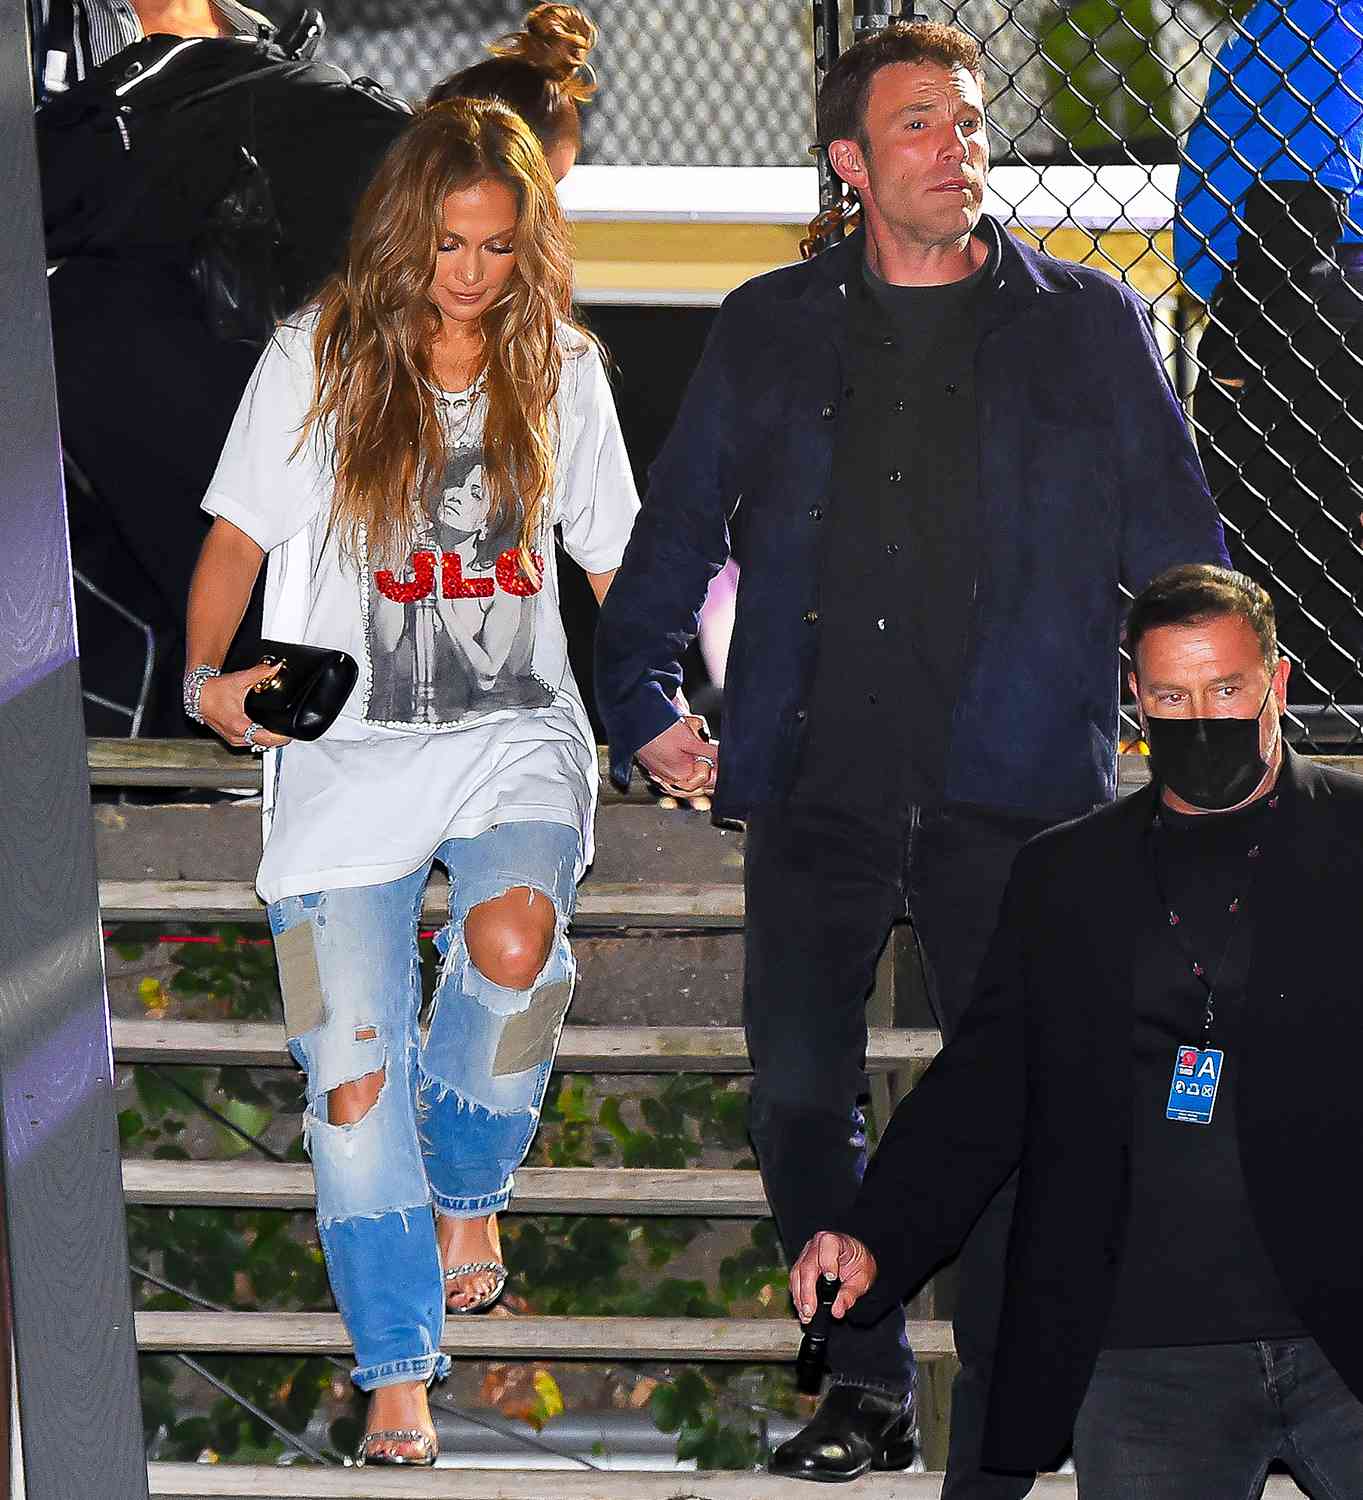 Jennifer Lopez and Ben Affleck are seen leaving Global Citizen Live at Central Park on September 25, 2021 in New York City.